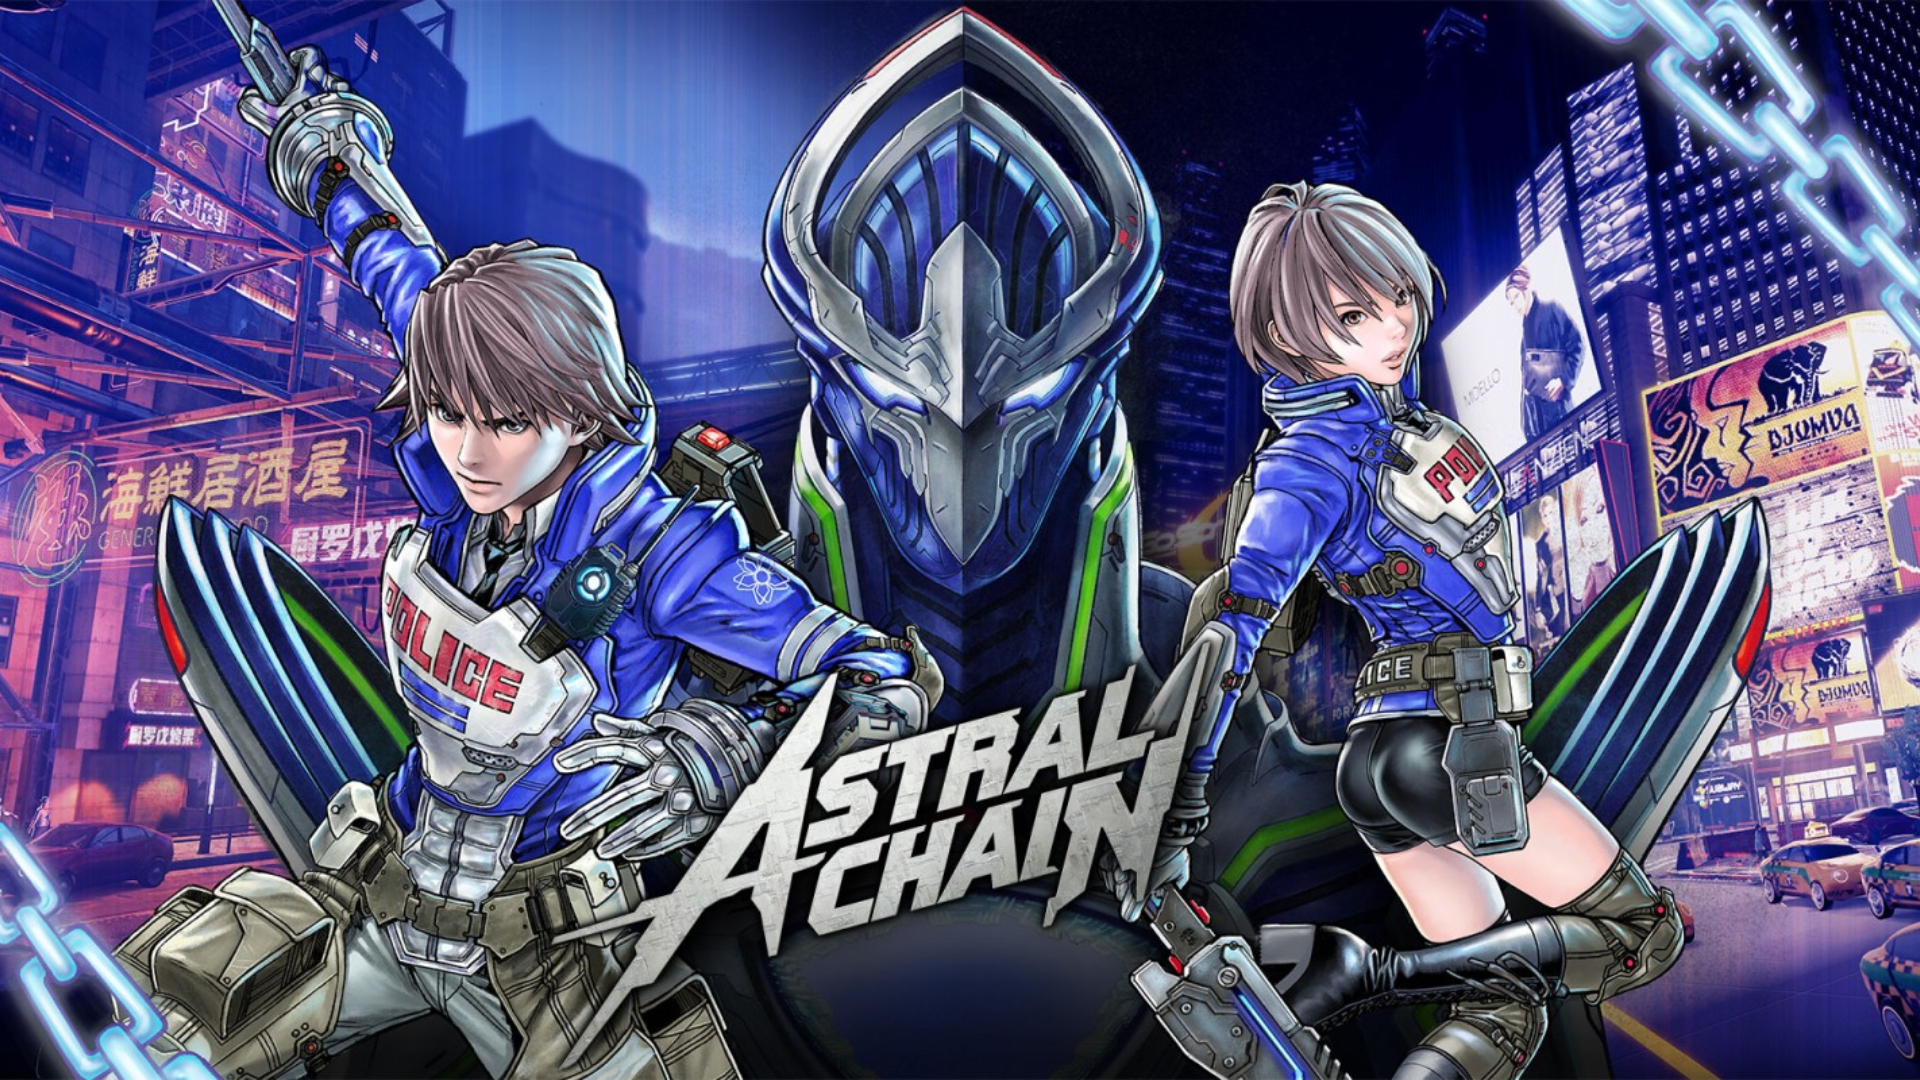 Best anime games: Astral Chain. Image shows the game's logo and two characters.